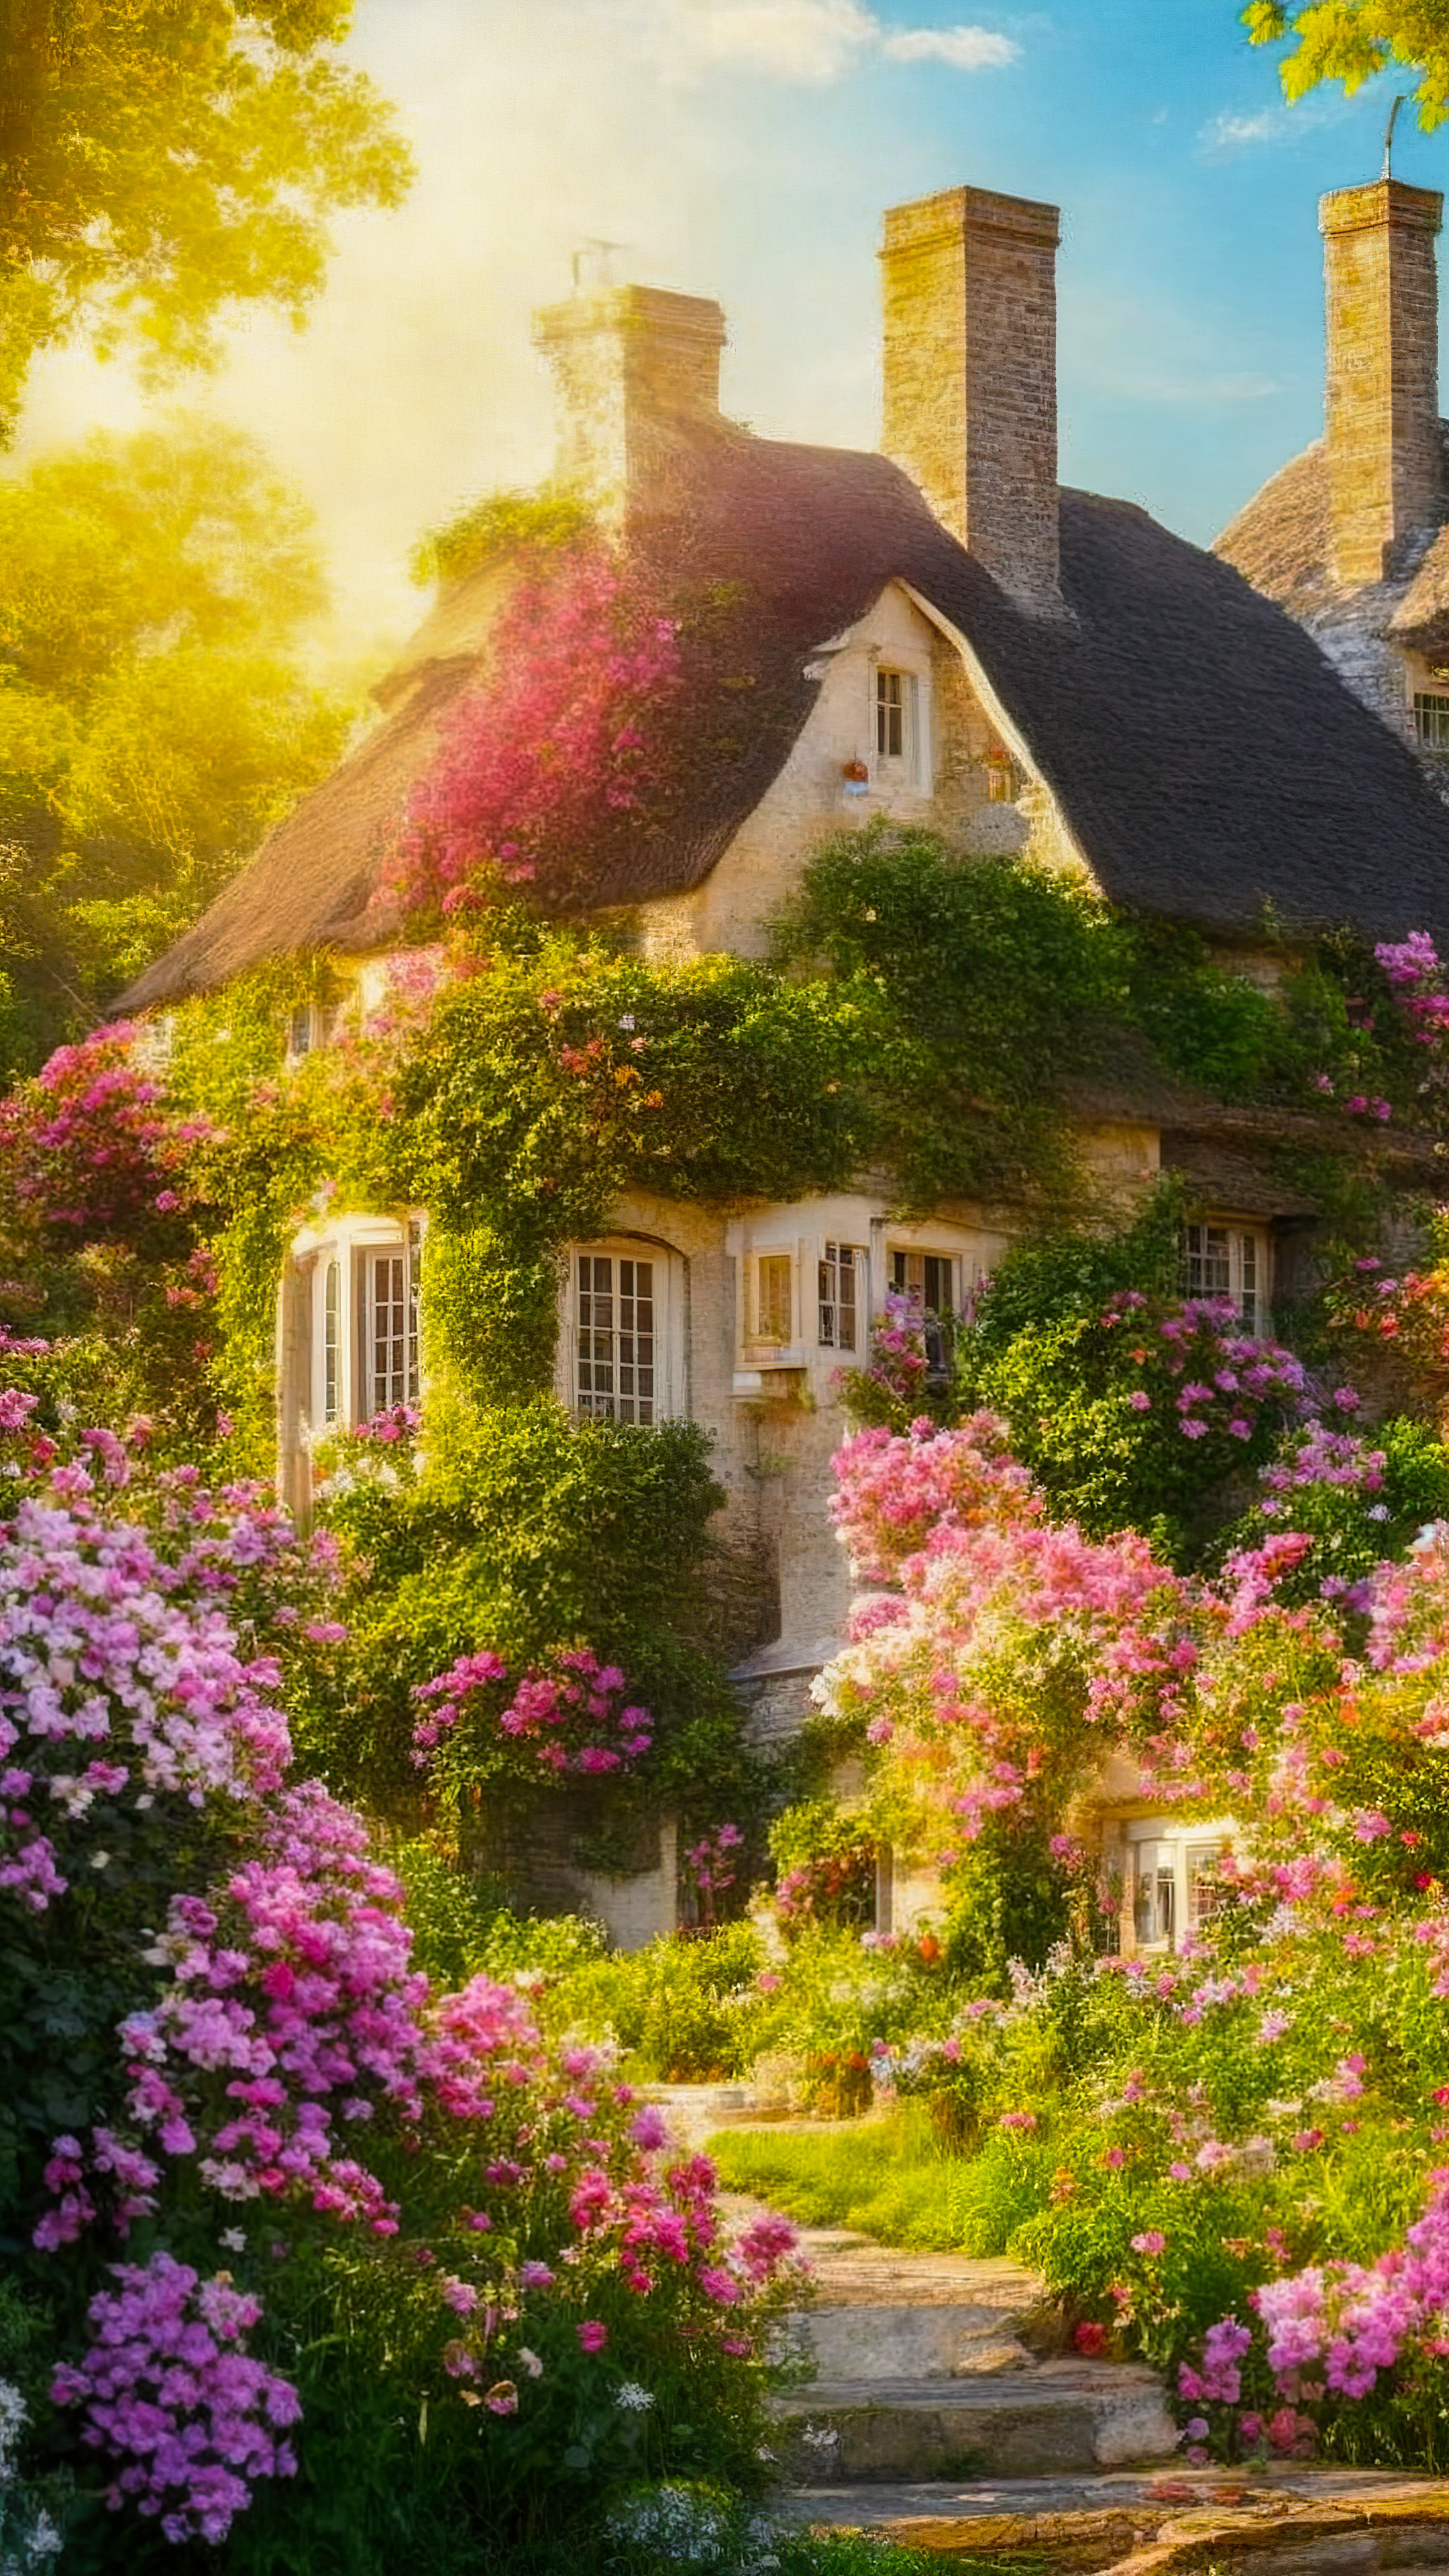 Experience the charm of a 4K nature wallpaper for your iPhone, featuring a quaint cottage nestled in a flower-filled garden, basking in the warmth of a sunny day.